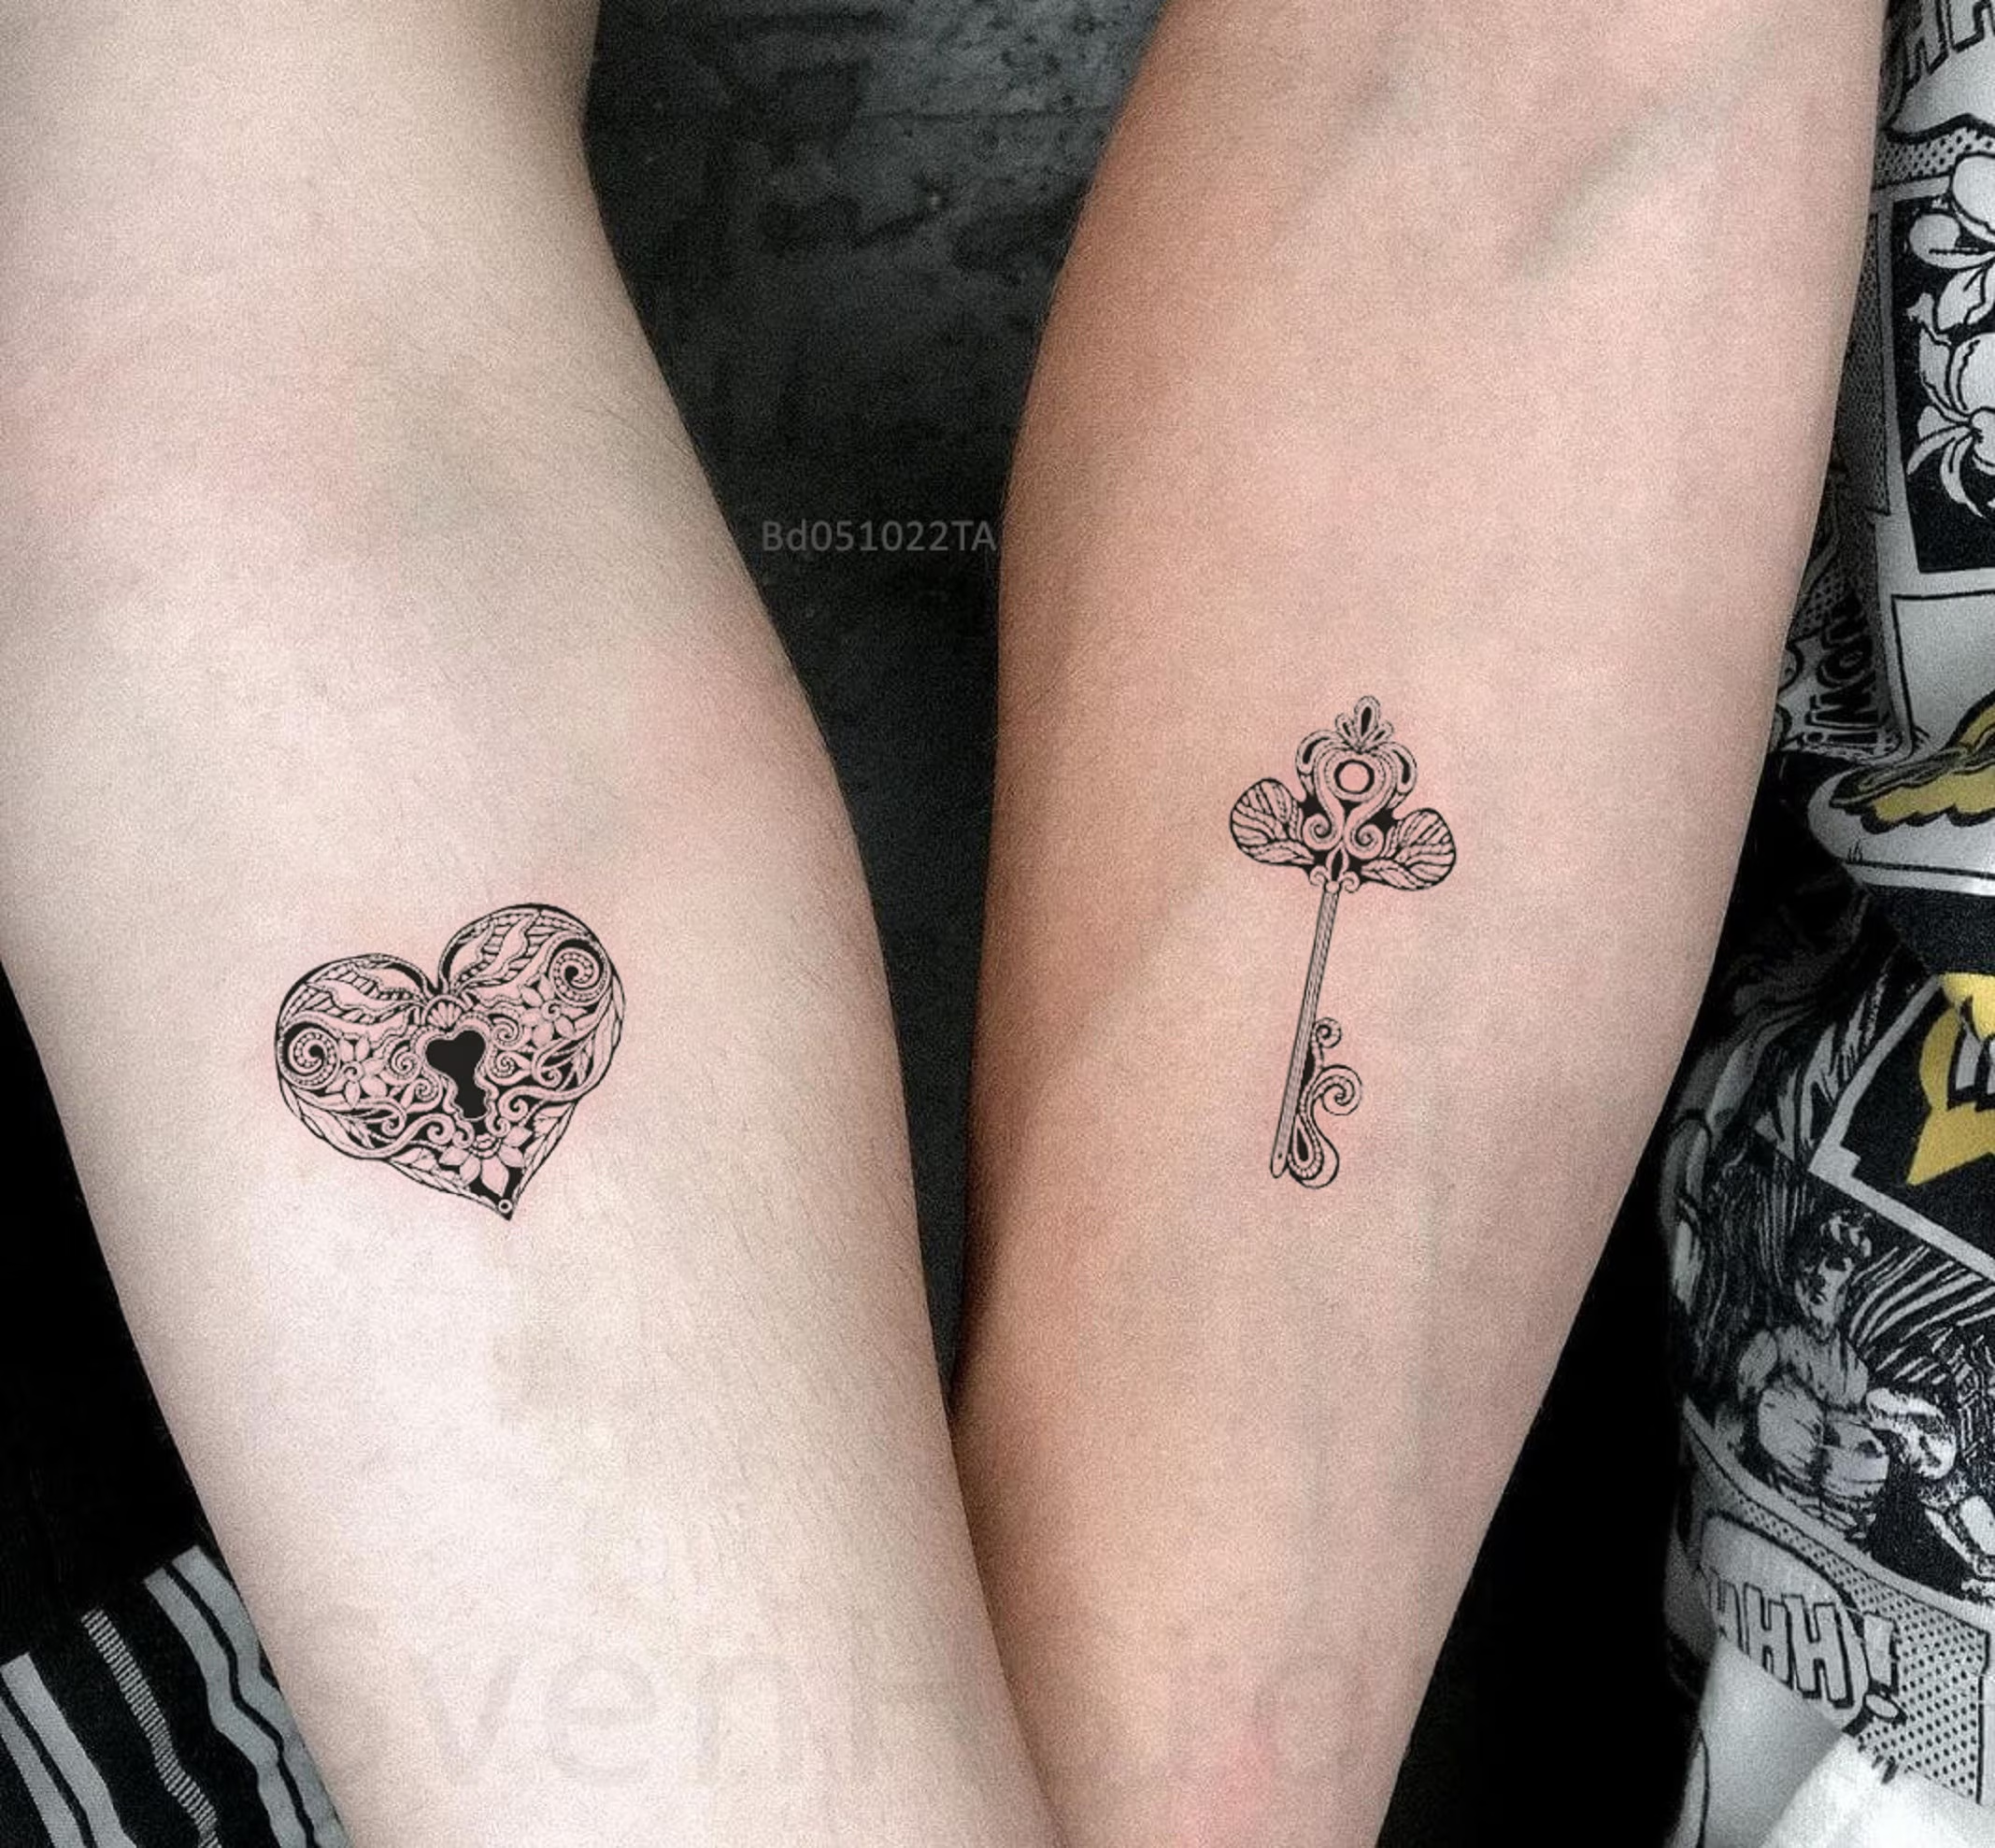 A group of sisters came in and all got tattoos last week. Was the sweetest  trio ever, very happy to give them some cute, meaningful tattoos… |  Instagram